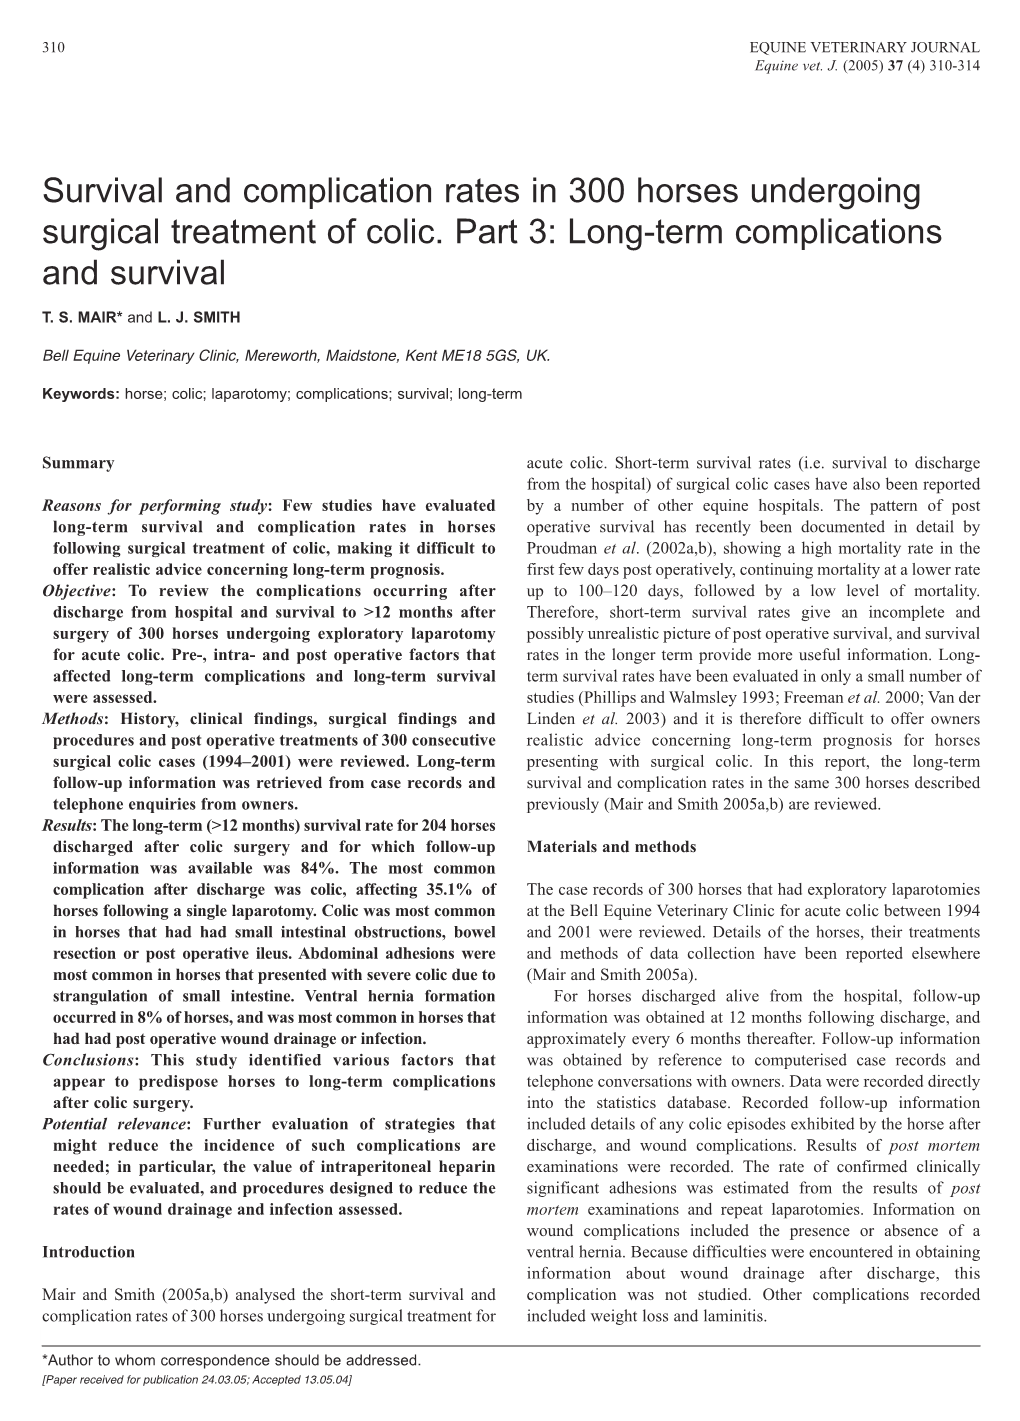 Survival and Complication Rates in 300 Horses Undergoing Surgical Treatment of Colic